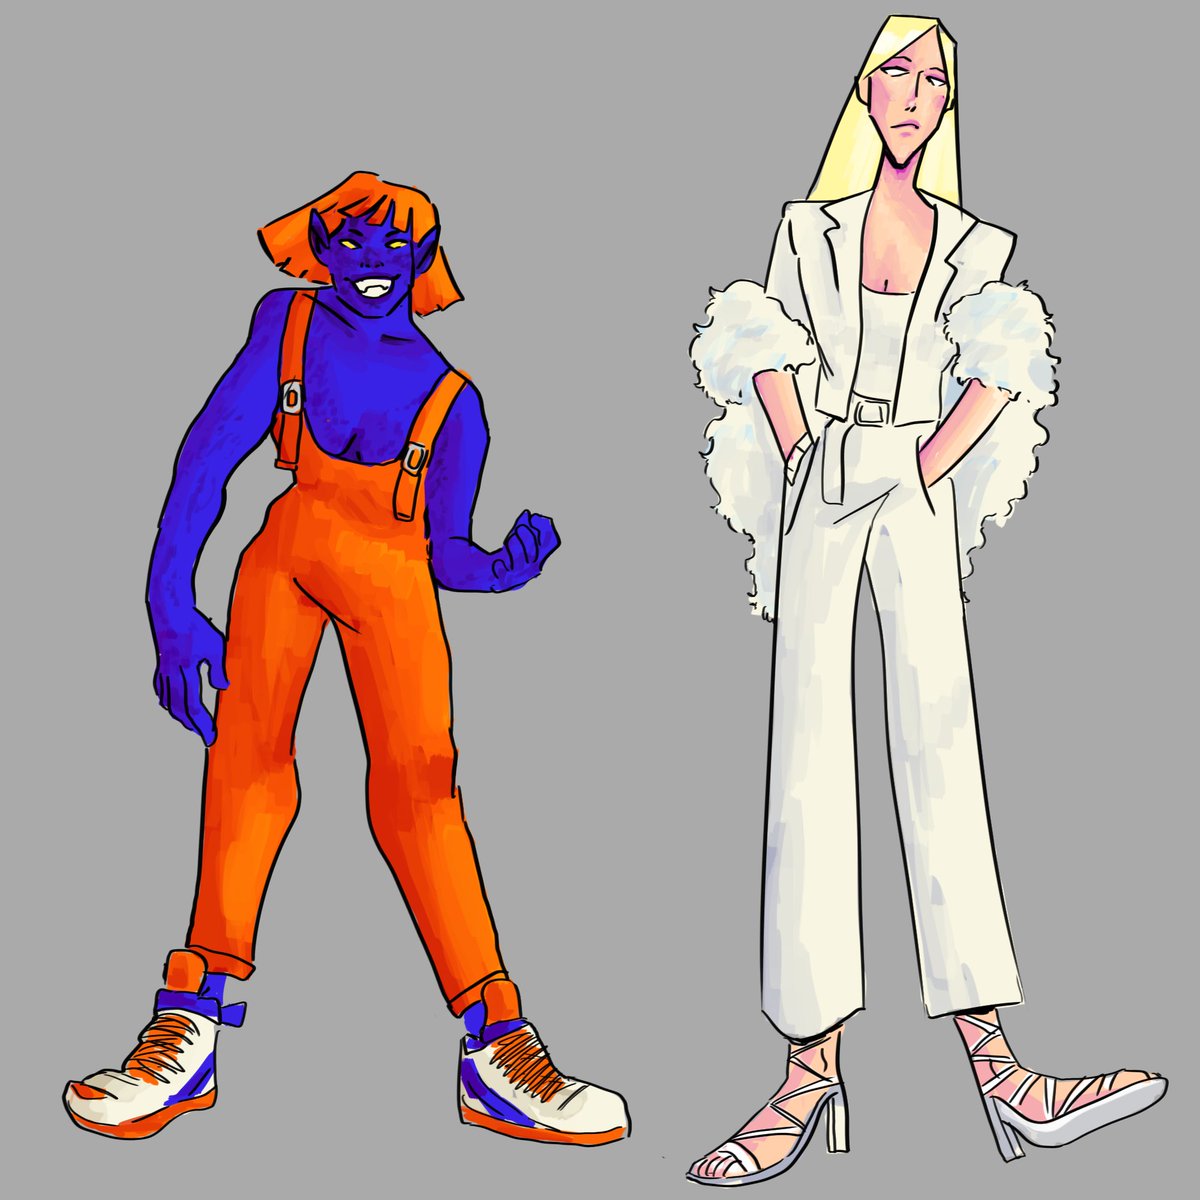 Morally ambivalent saphics! I think mystique should always be ready to get her tits out and emma should wear actual clothes. Also I gave mystique pointy ears to get her closer to her son and Emma is just. pointy